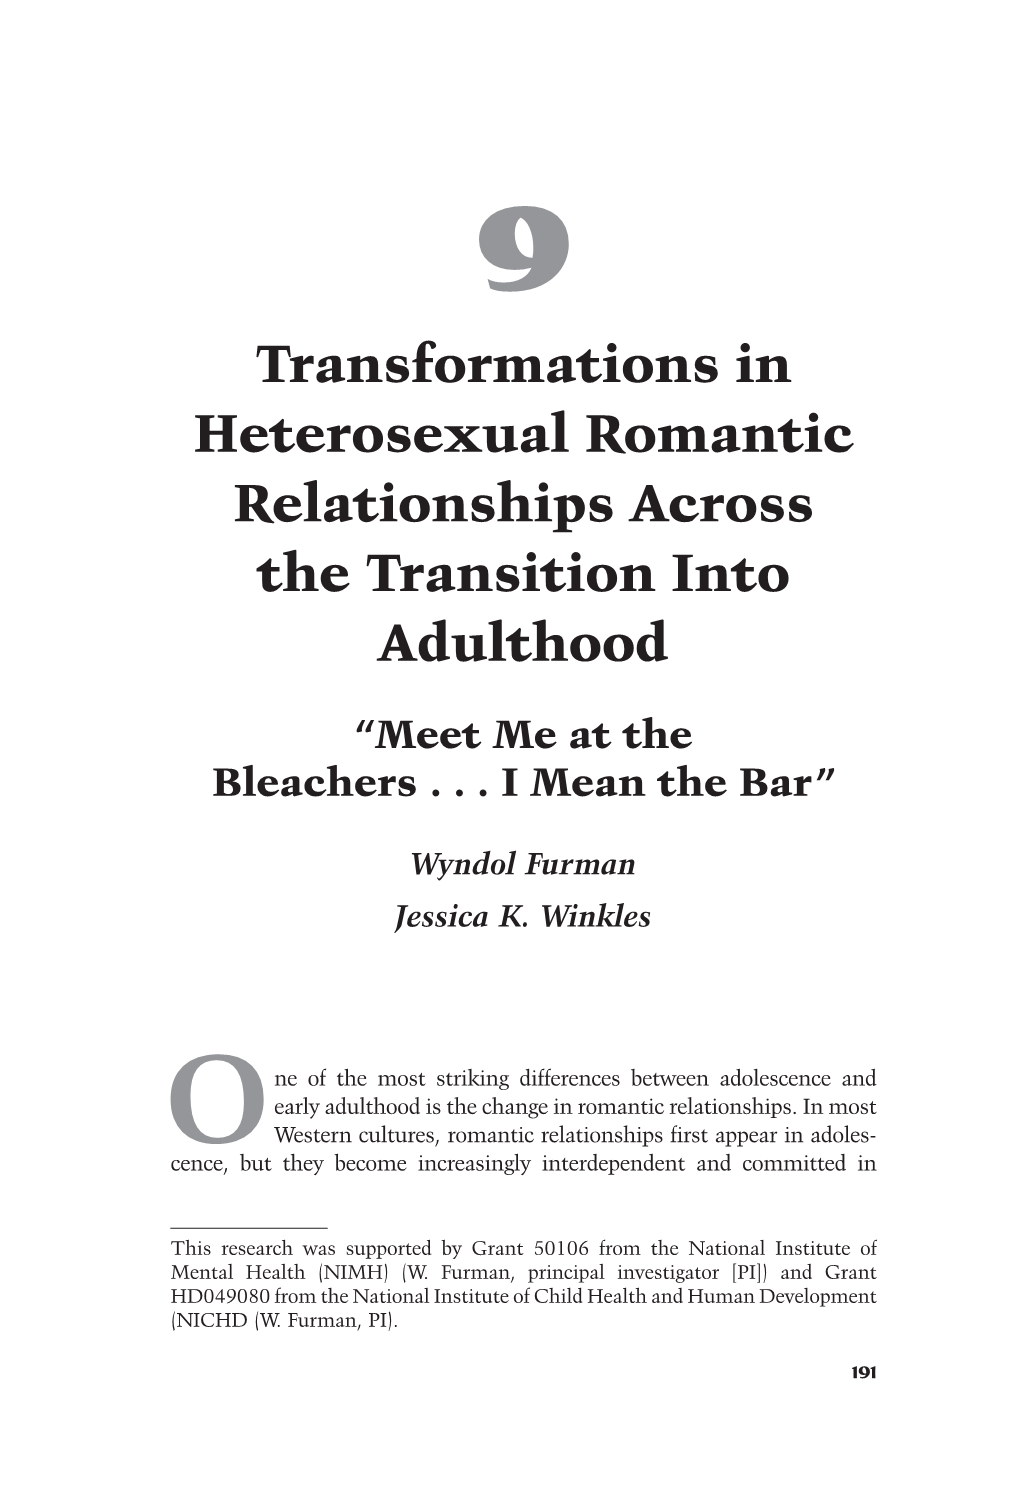 Transformations in Heterosexual Romantic Relationships Across the Transition Into Adulthood